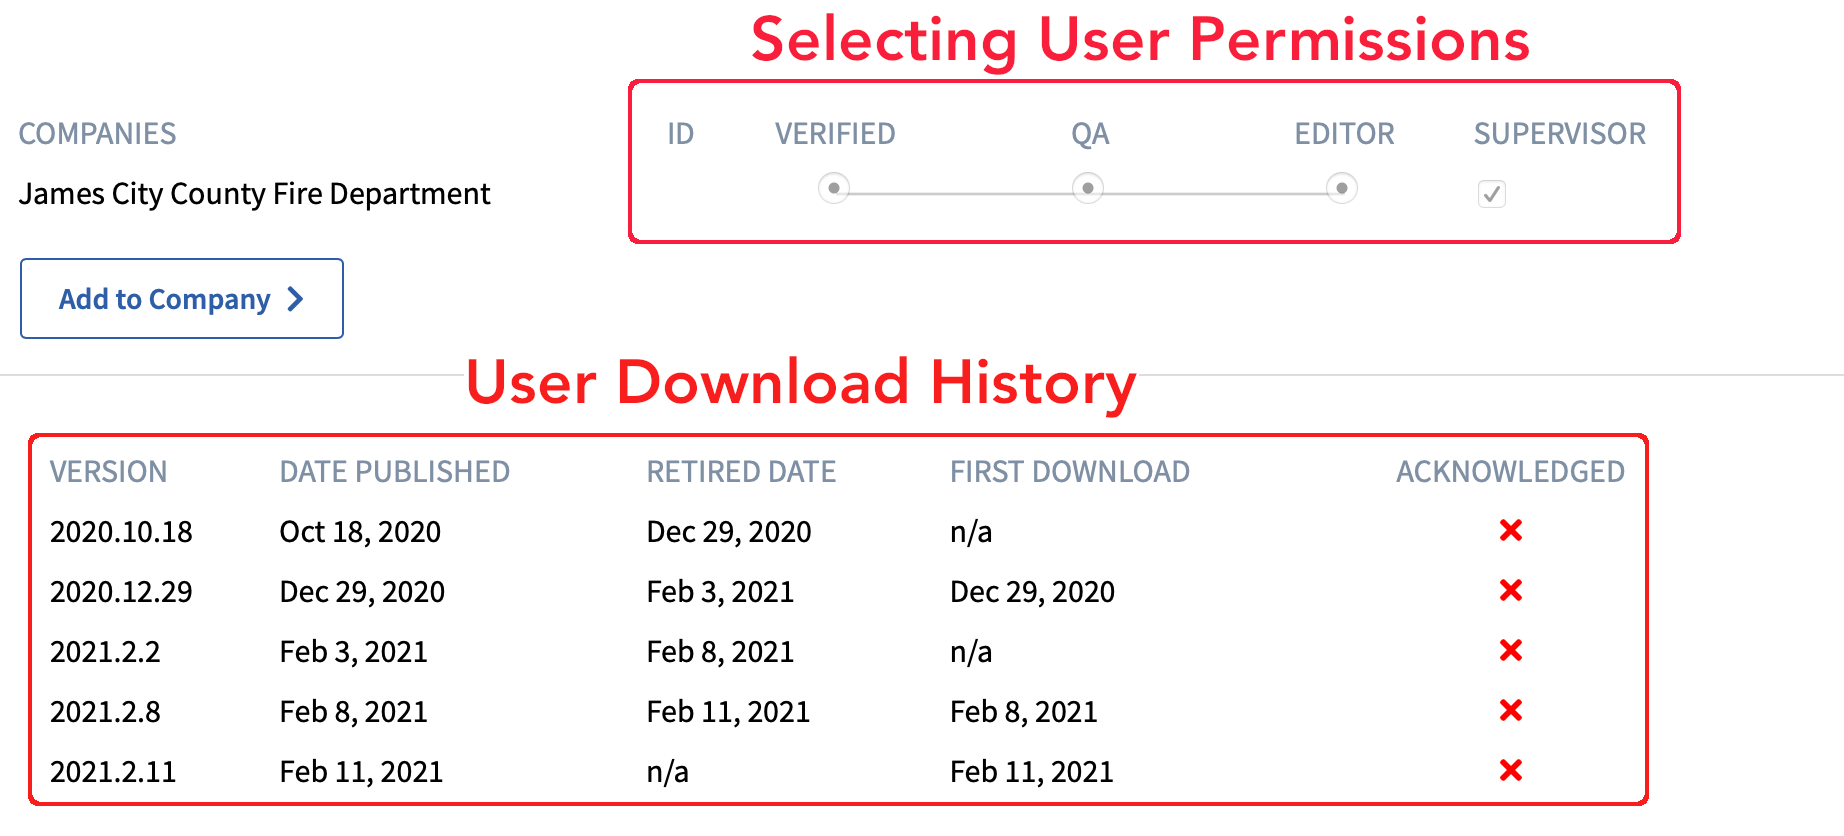 The Users page in the web portal with permissions and download history